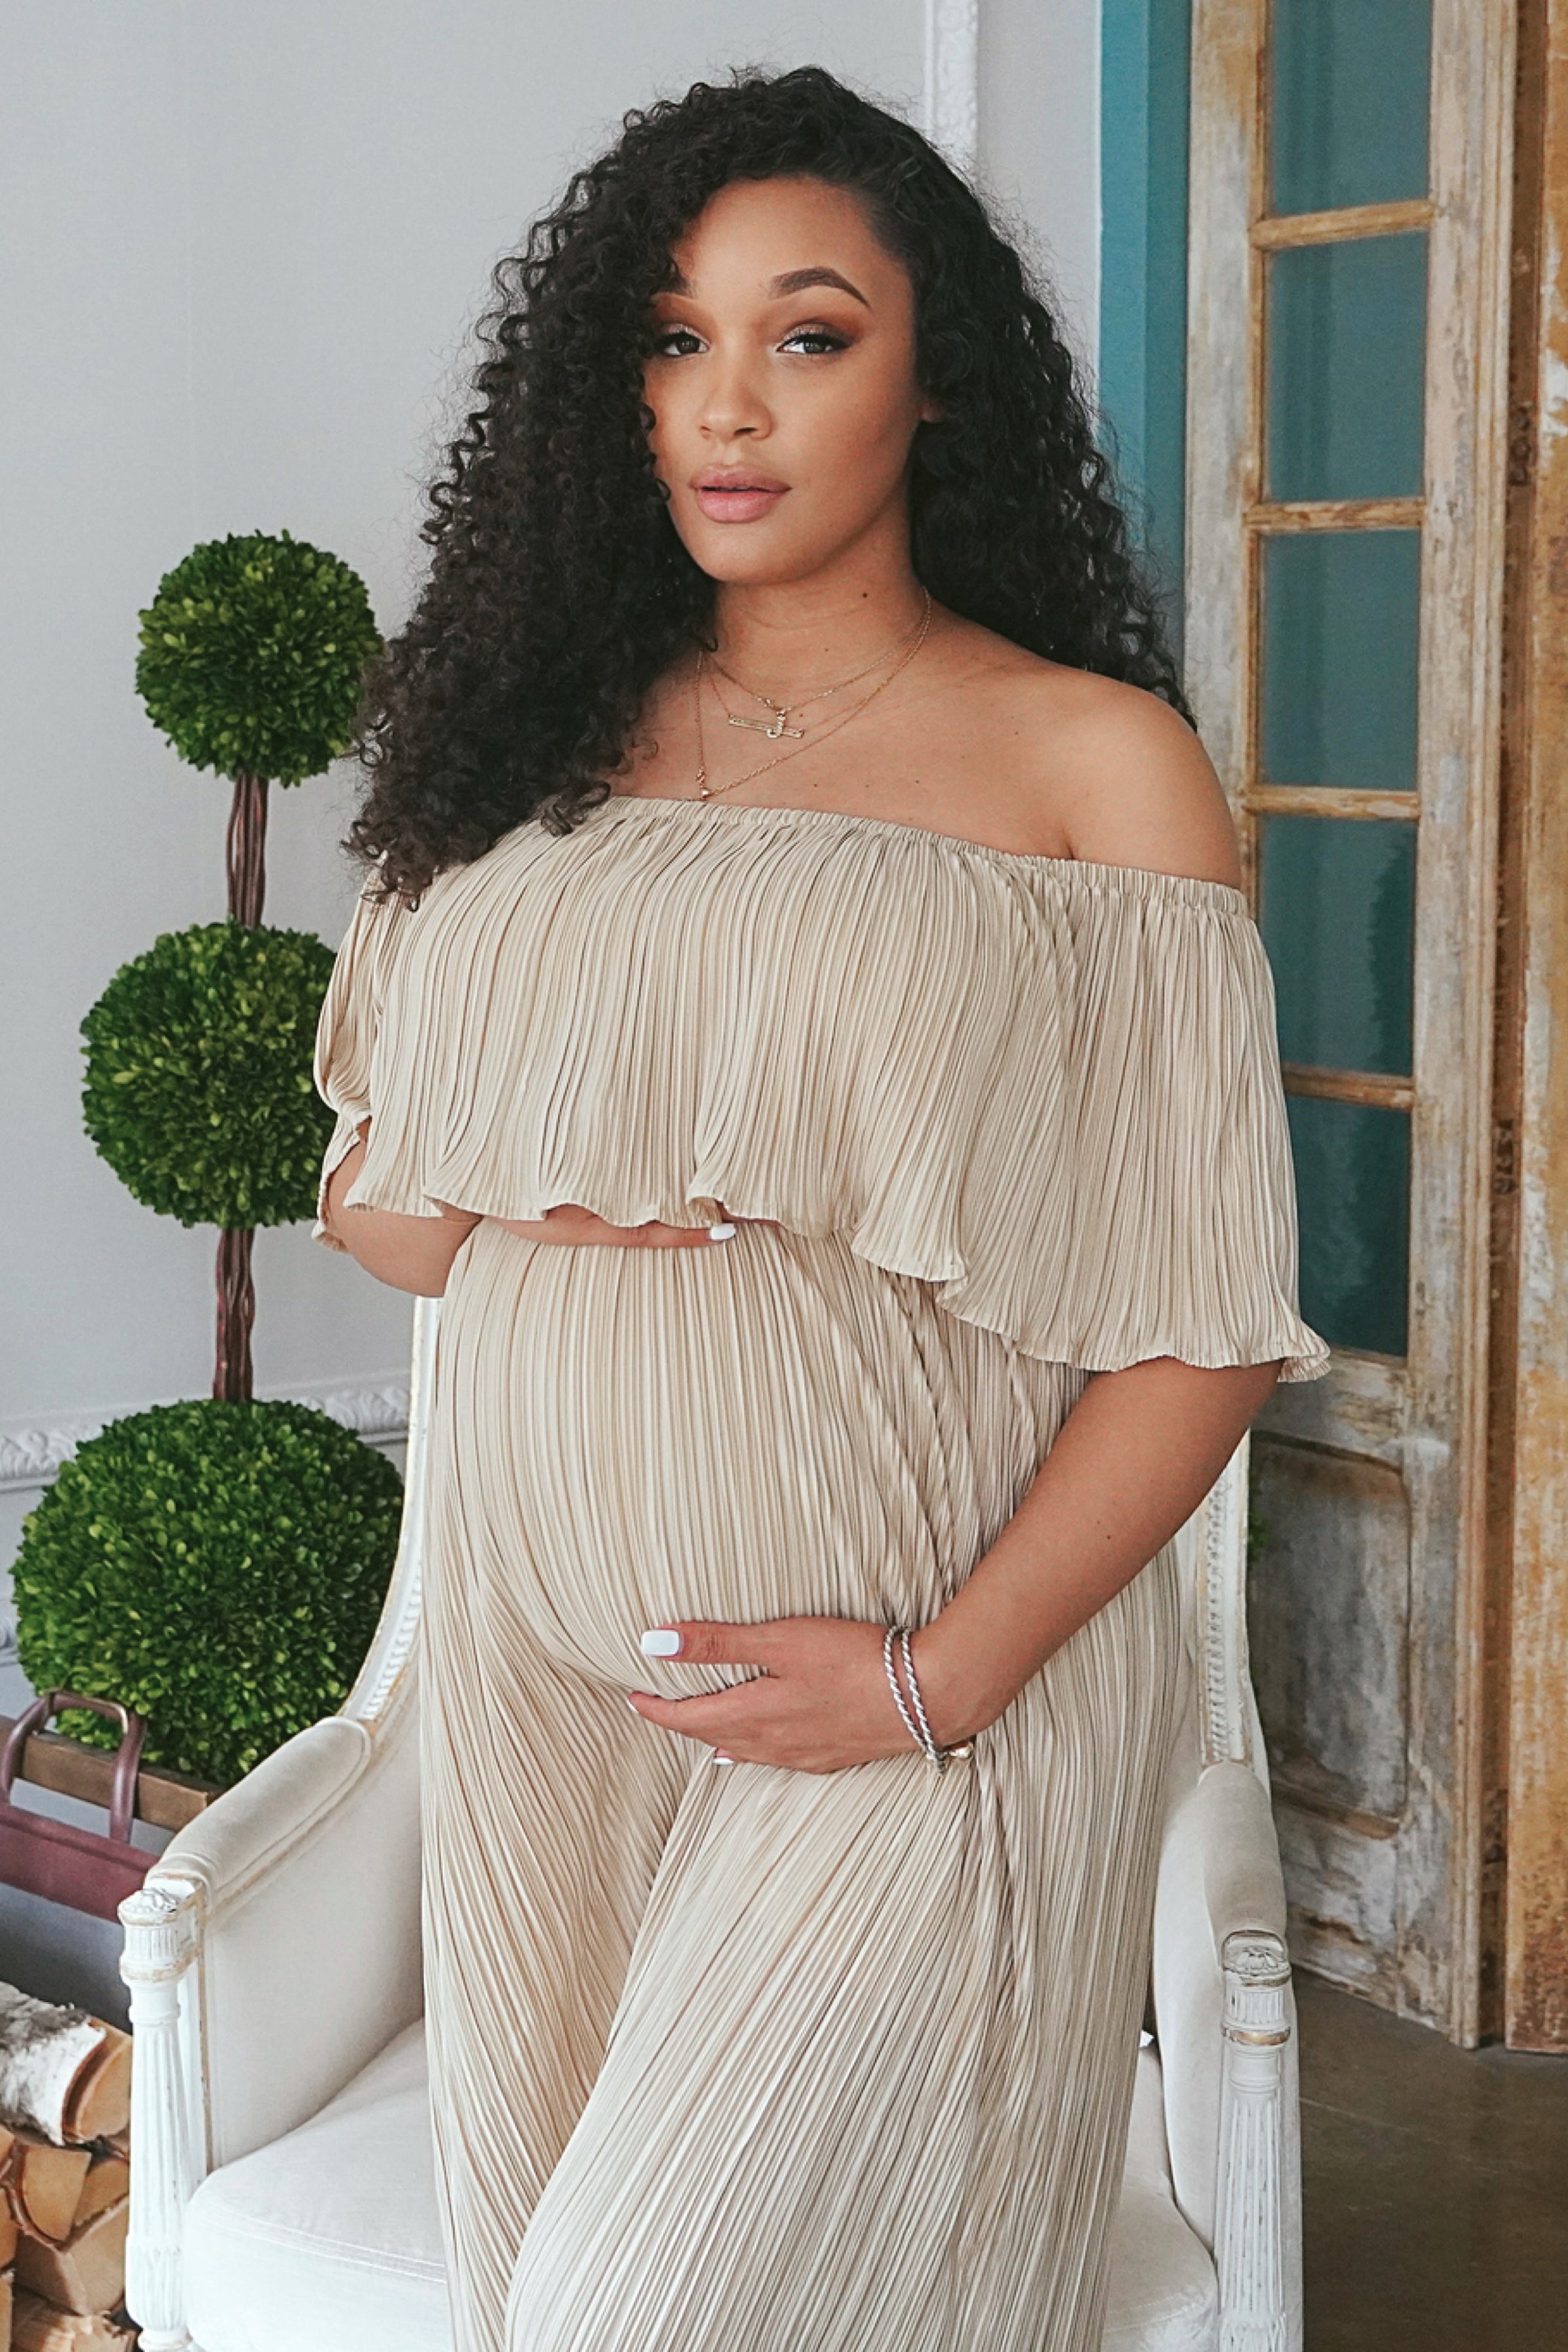 Pink Metallic Maternity Gown, Baby Shower, Pregnant Guest – Chic Bump Club